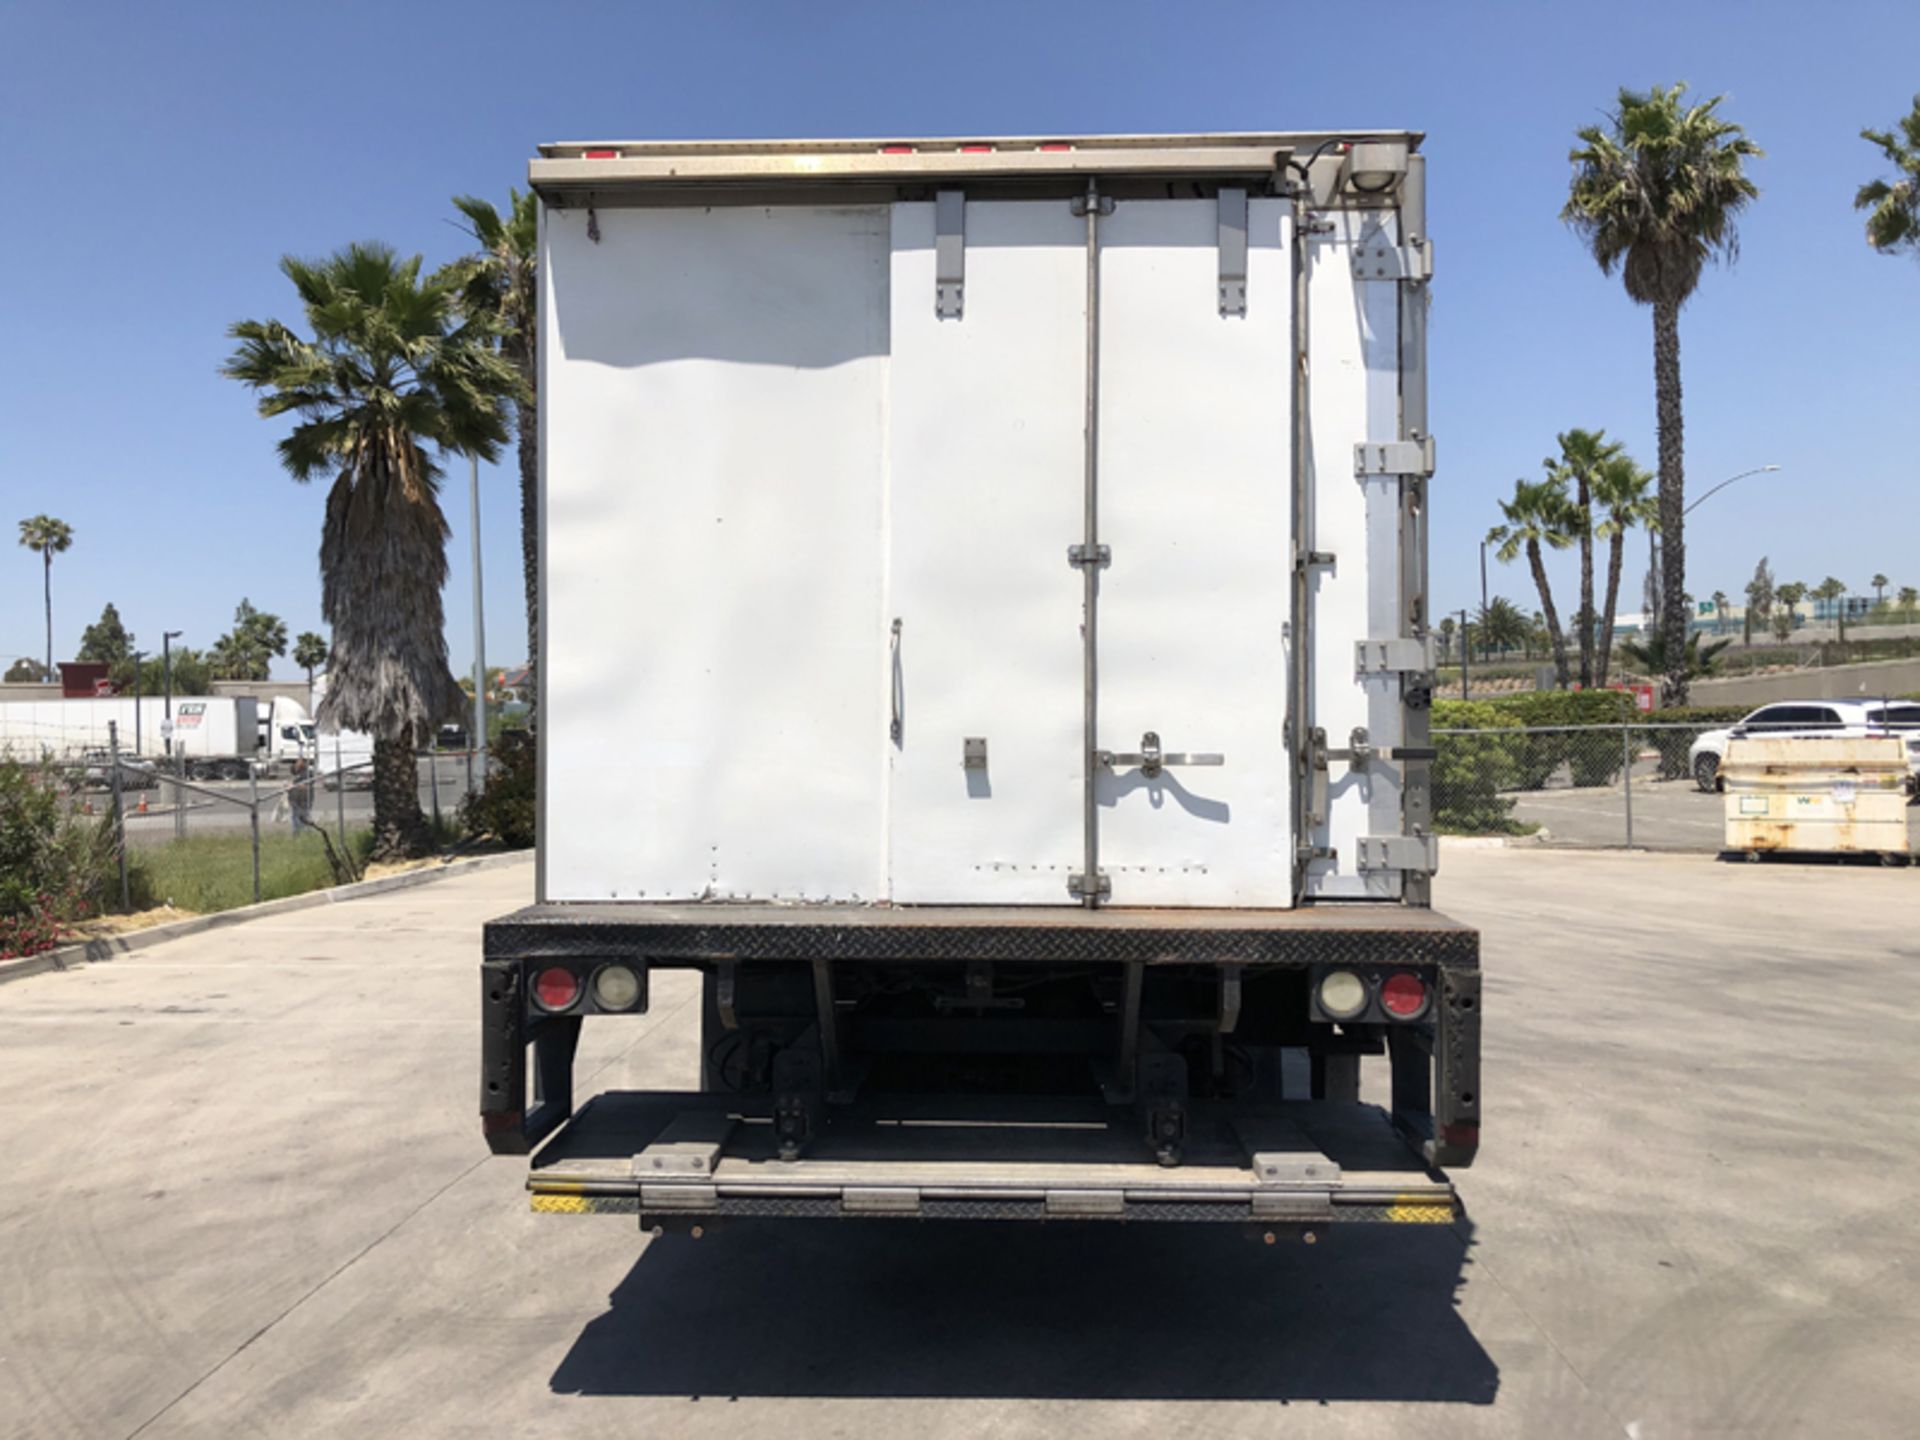 2018 INTERNATIONAL 4400 SBA 6X4 REFRIGERATED BOX TRUCK VIN#: 1HTMSTAR9JH528880, Approx Miles: 85689, - Image 5 of 10